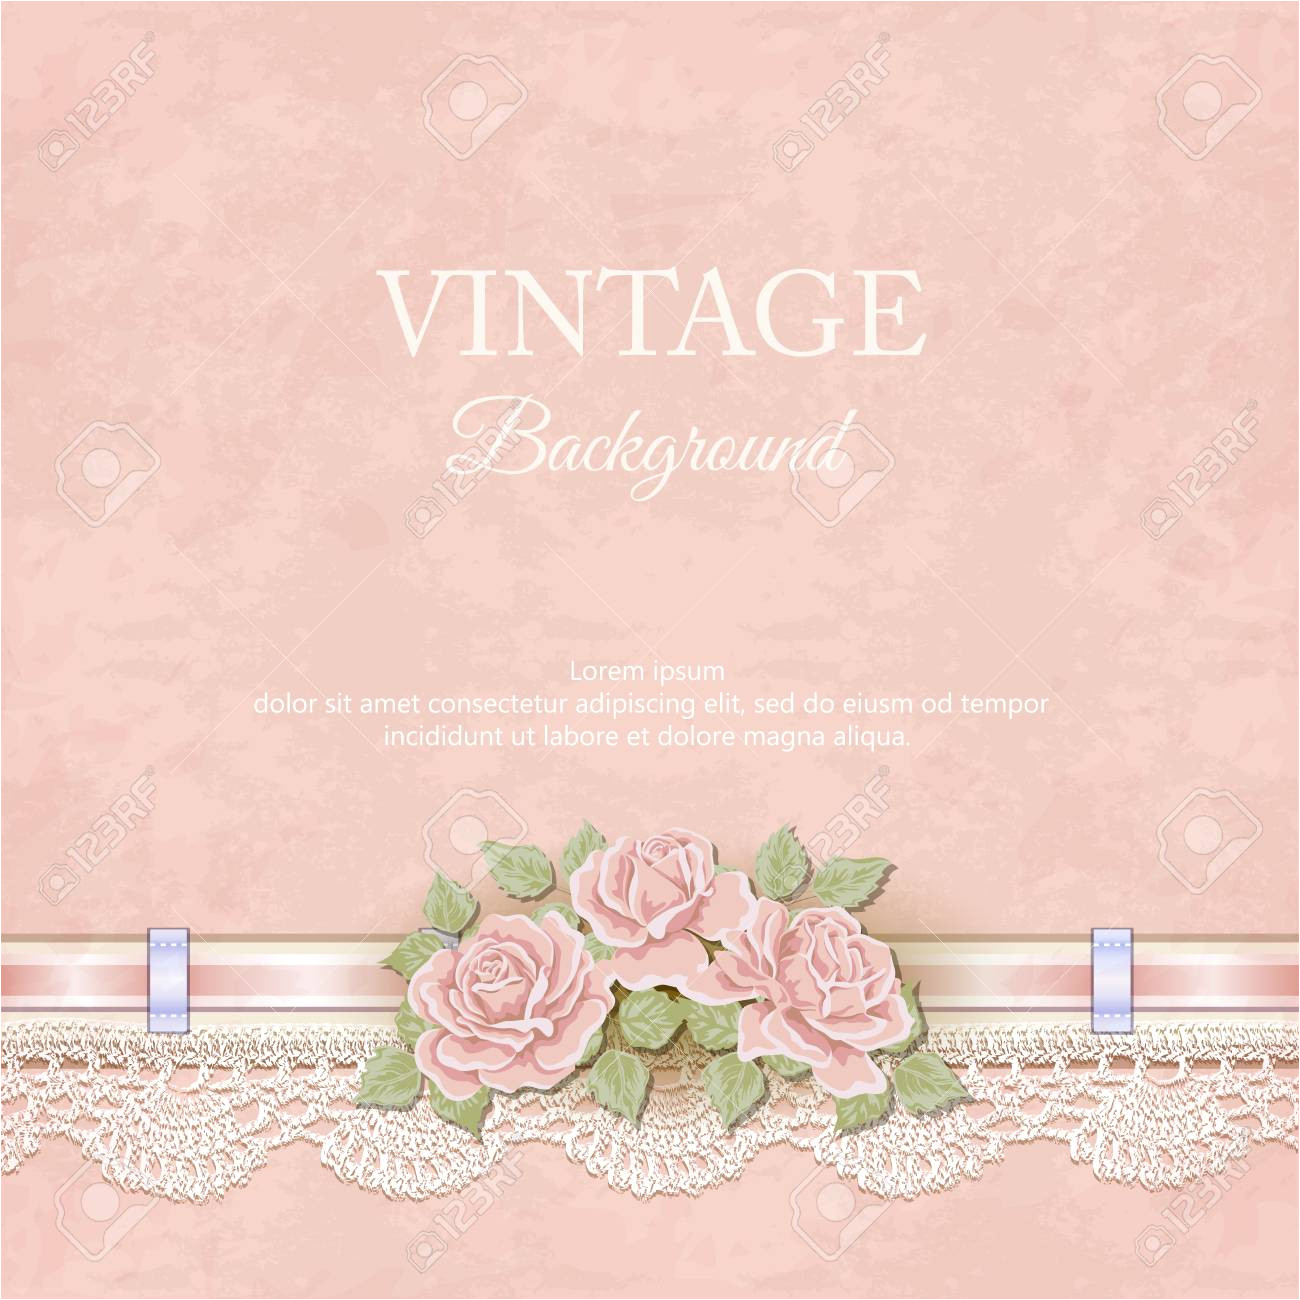 106890960 beautiful design of greeting card invitation with roses vintage background jpg